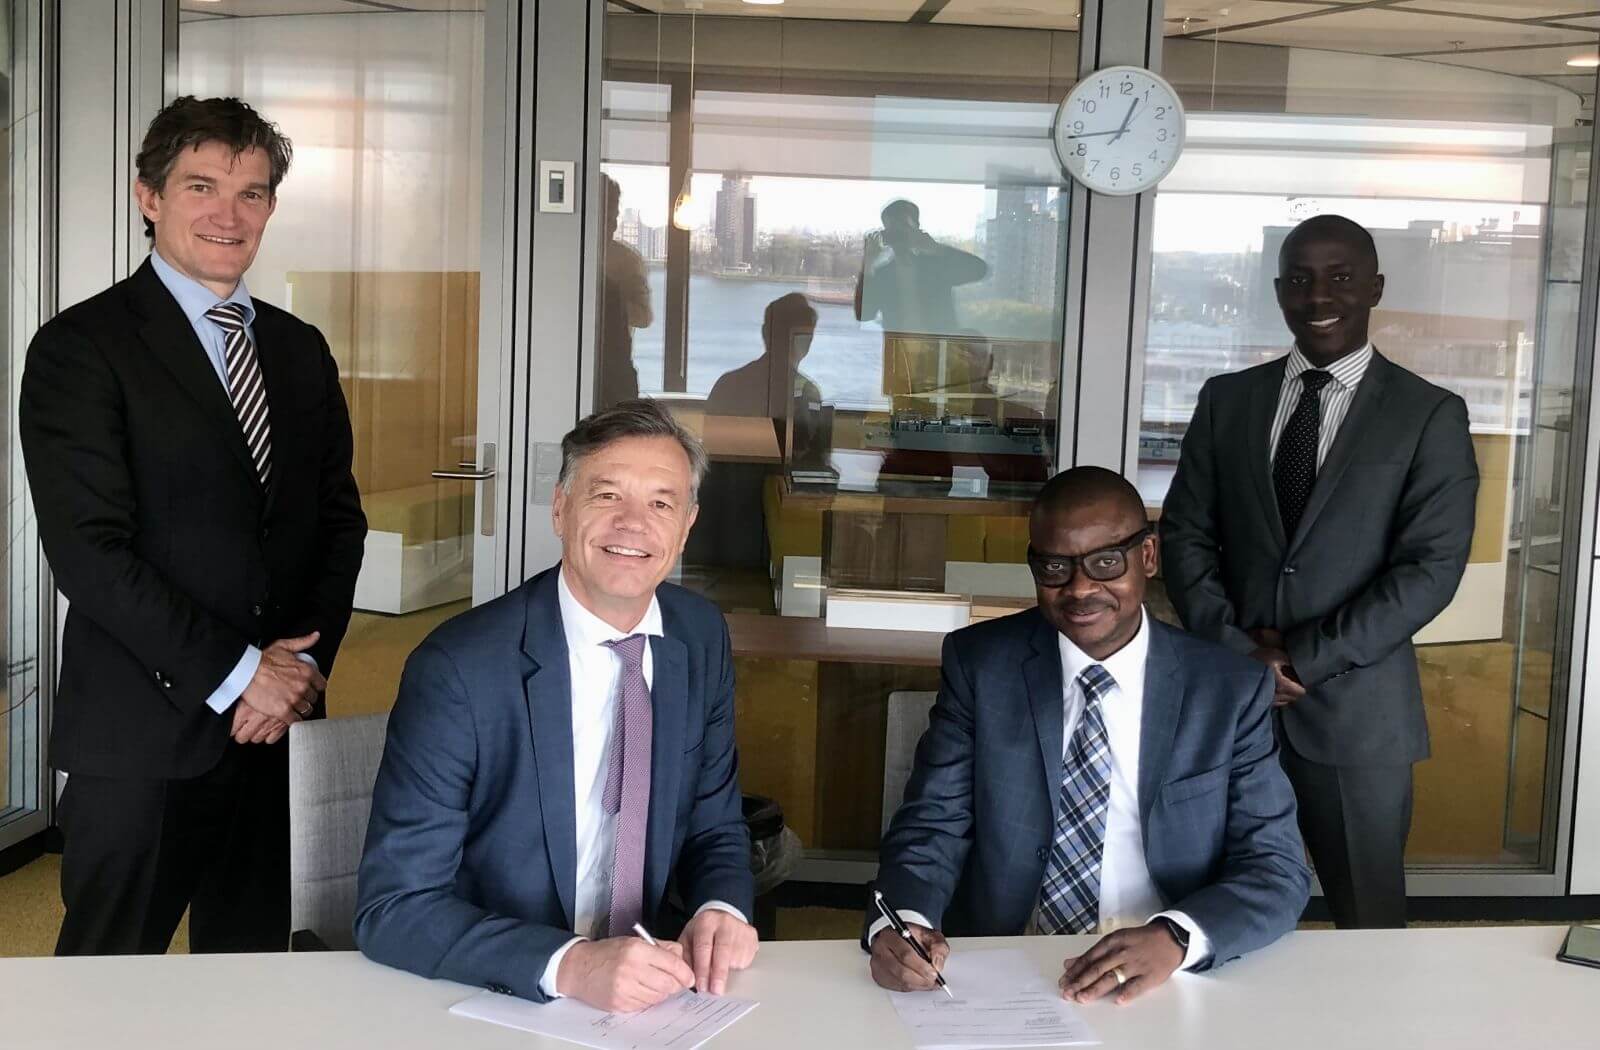 Namibia, Port of Rotterdam to develop a green hydrogen supply chain